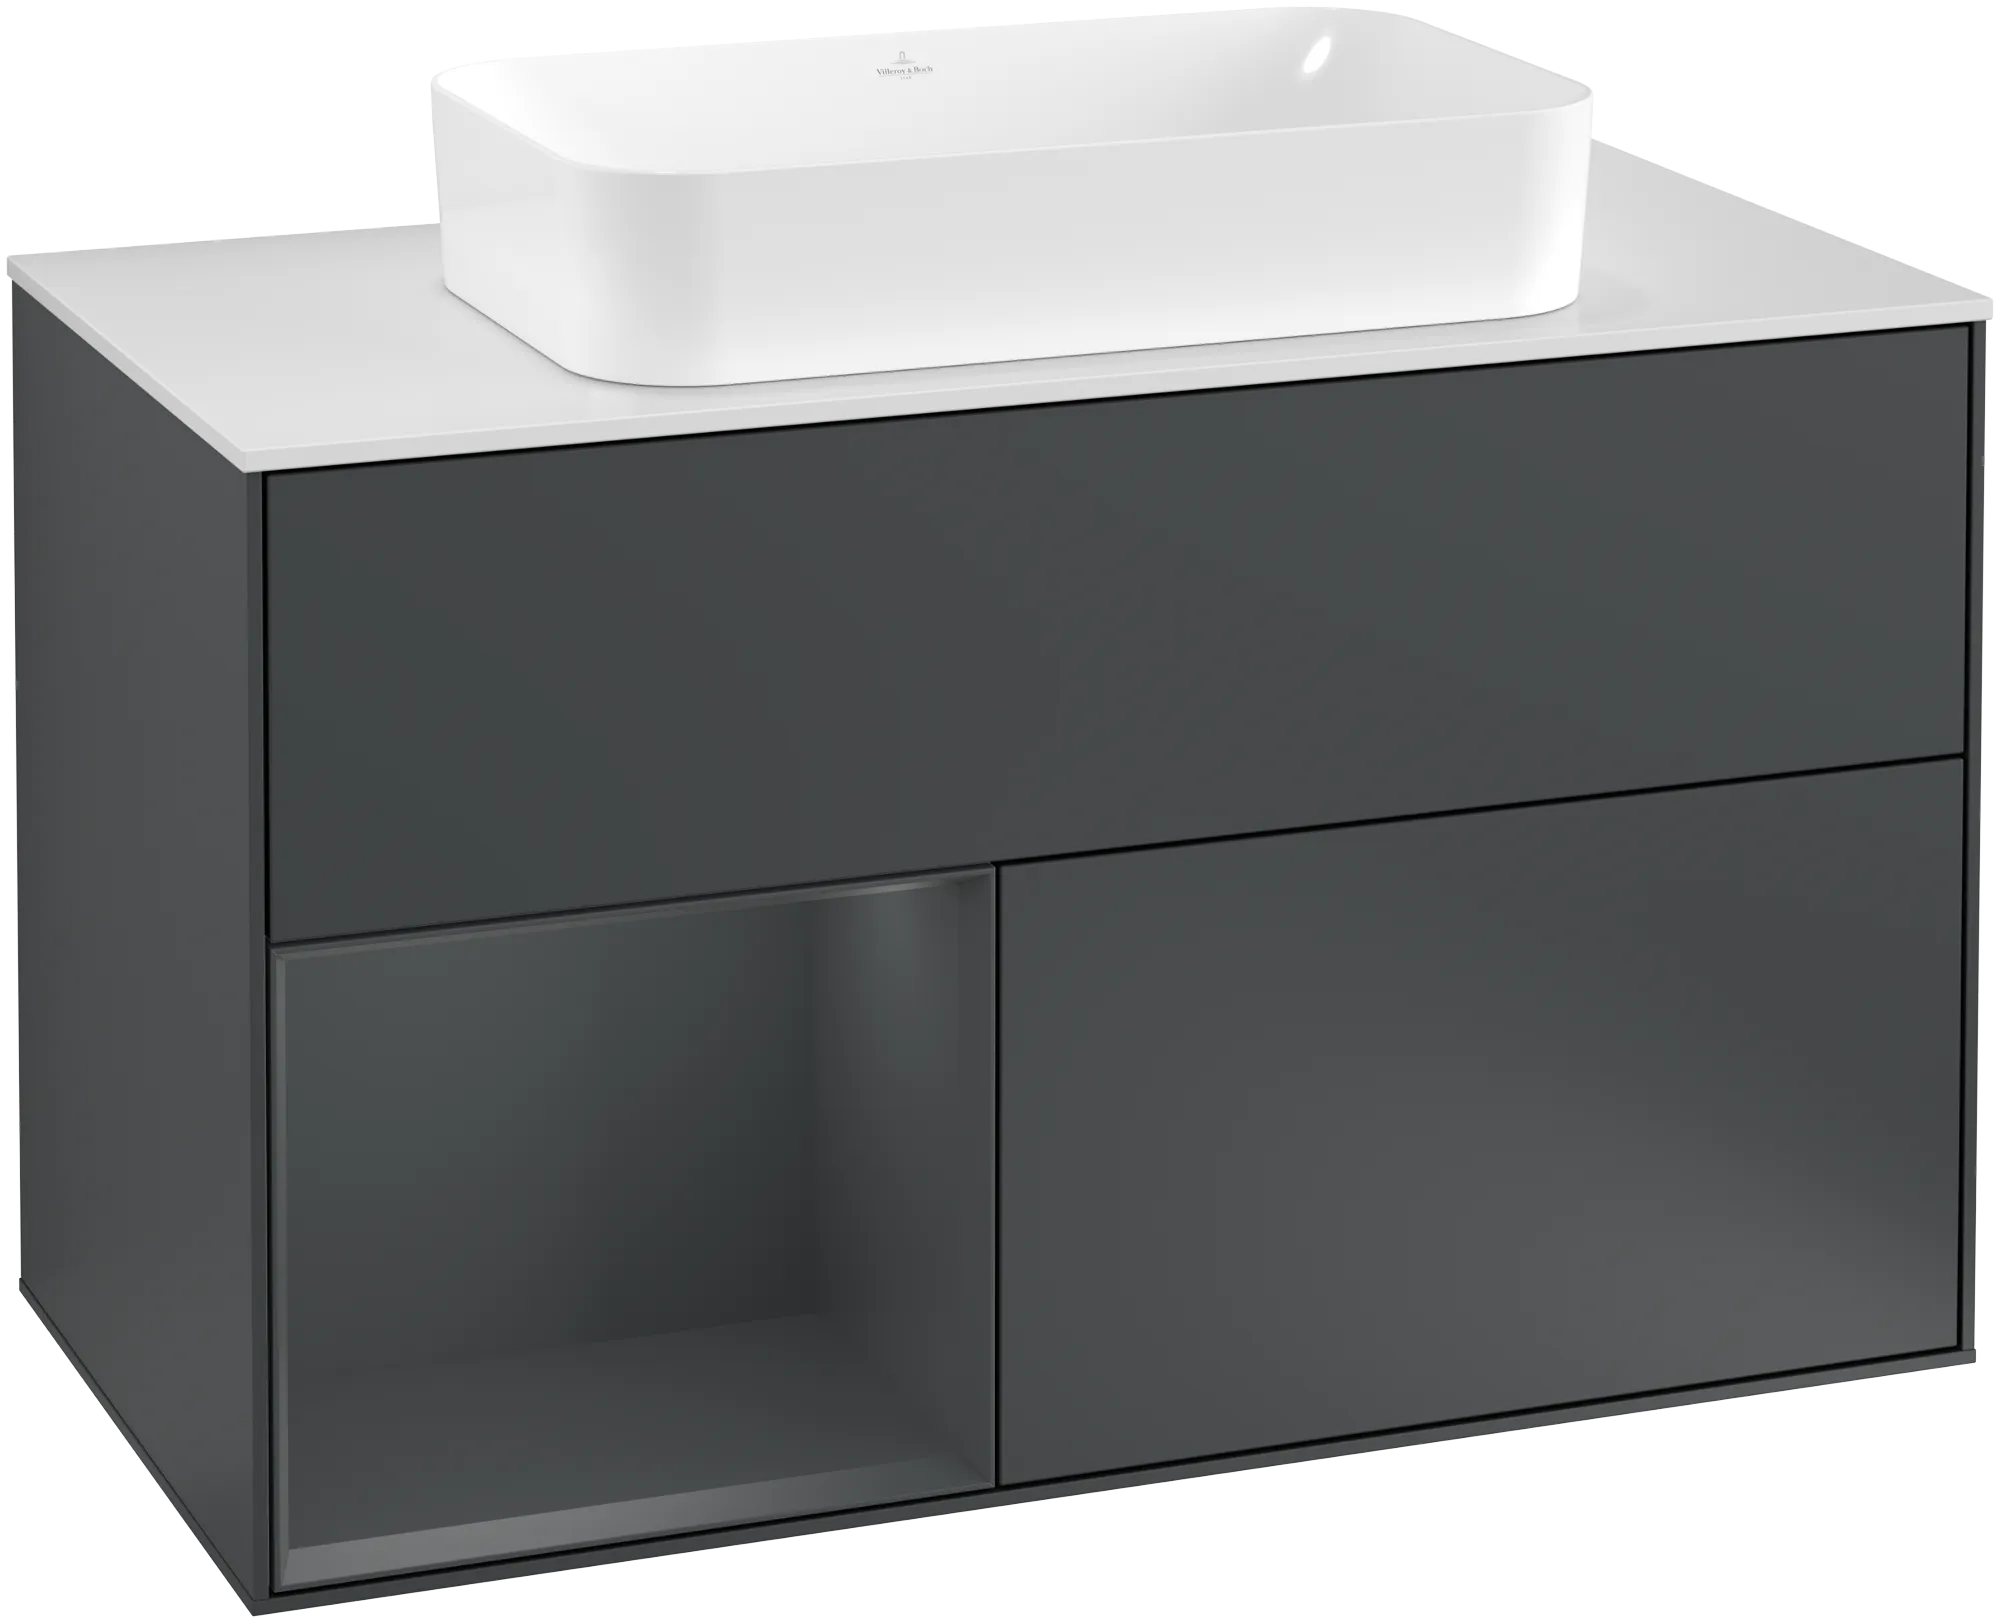 Picture of VILLEROY BOCH Finion Vanity unit, with lighting, 2 pull-out compartments, 1000 x 603 x 501 mm, Midnight Blue Matt Lacquer / Midnight Blue Matt Lacquer / Glass White Matt #G241HGHG